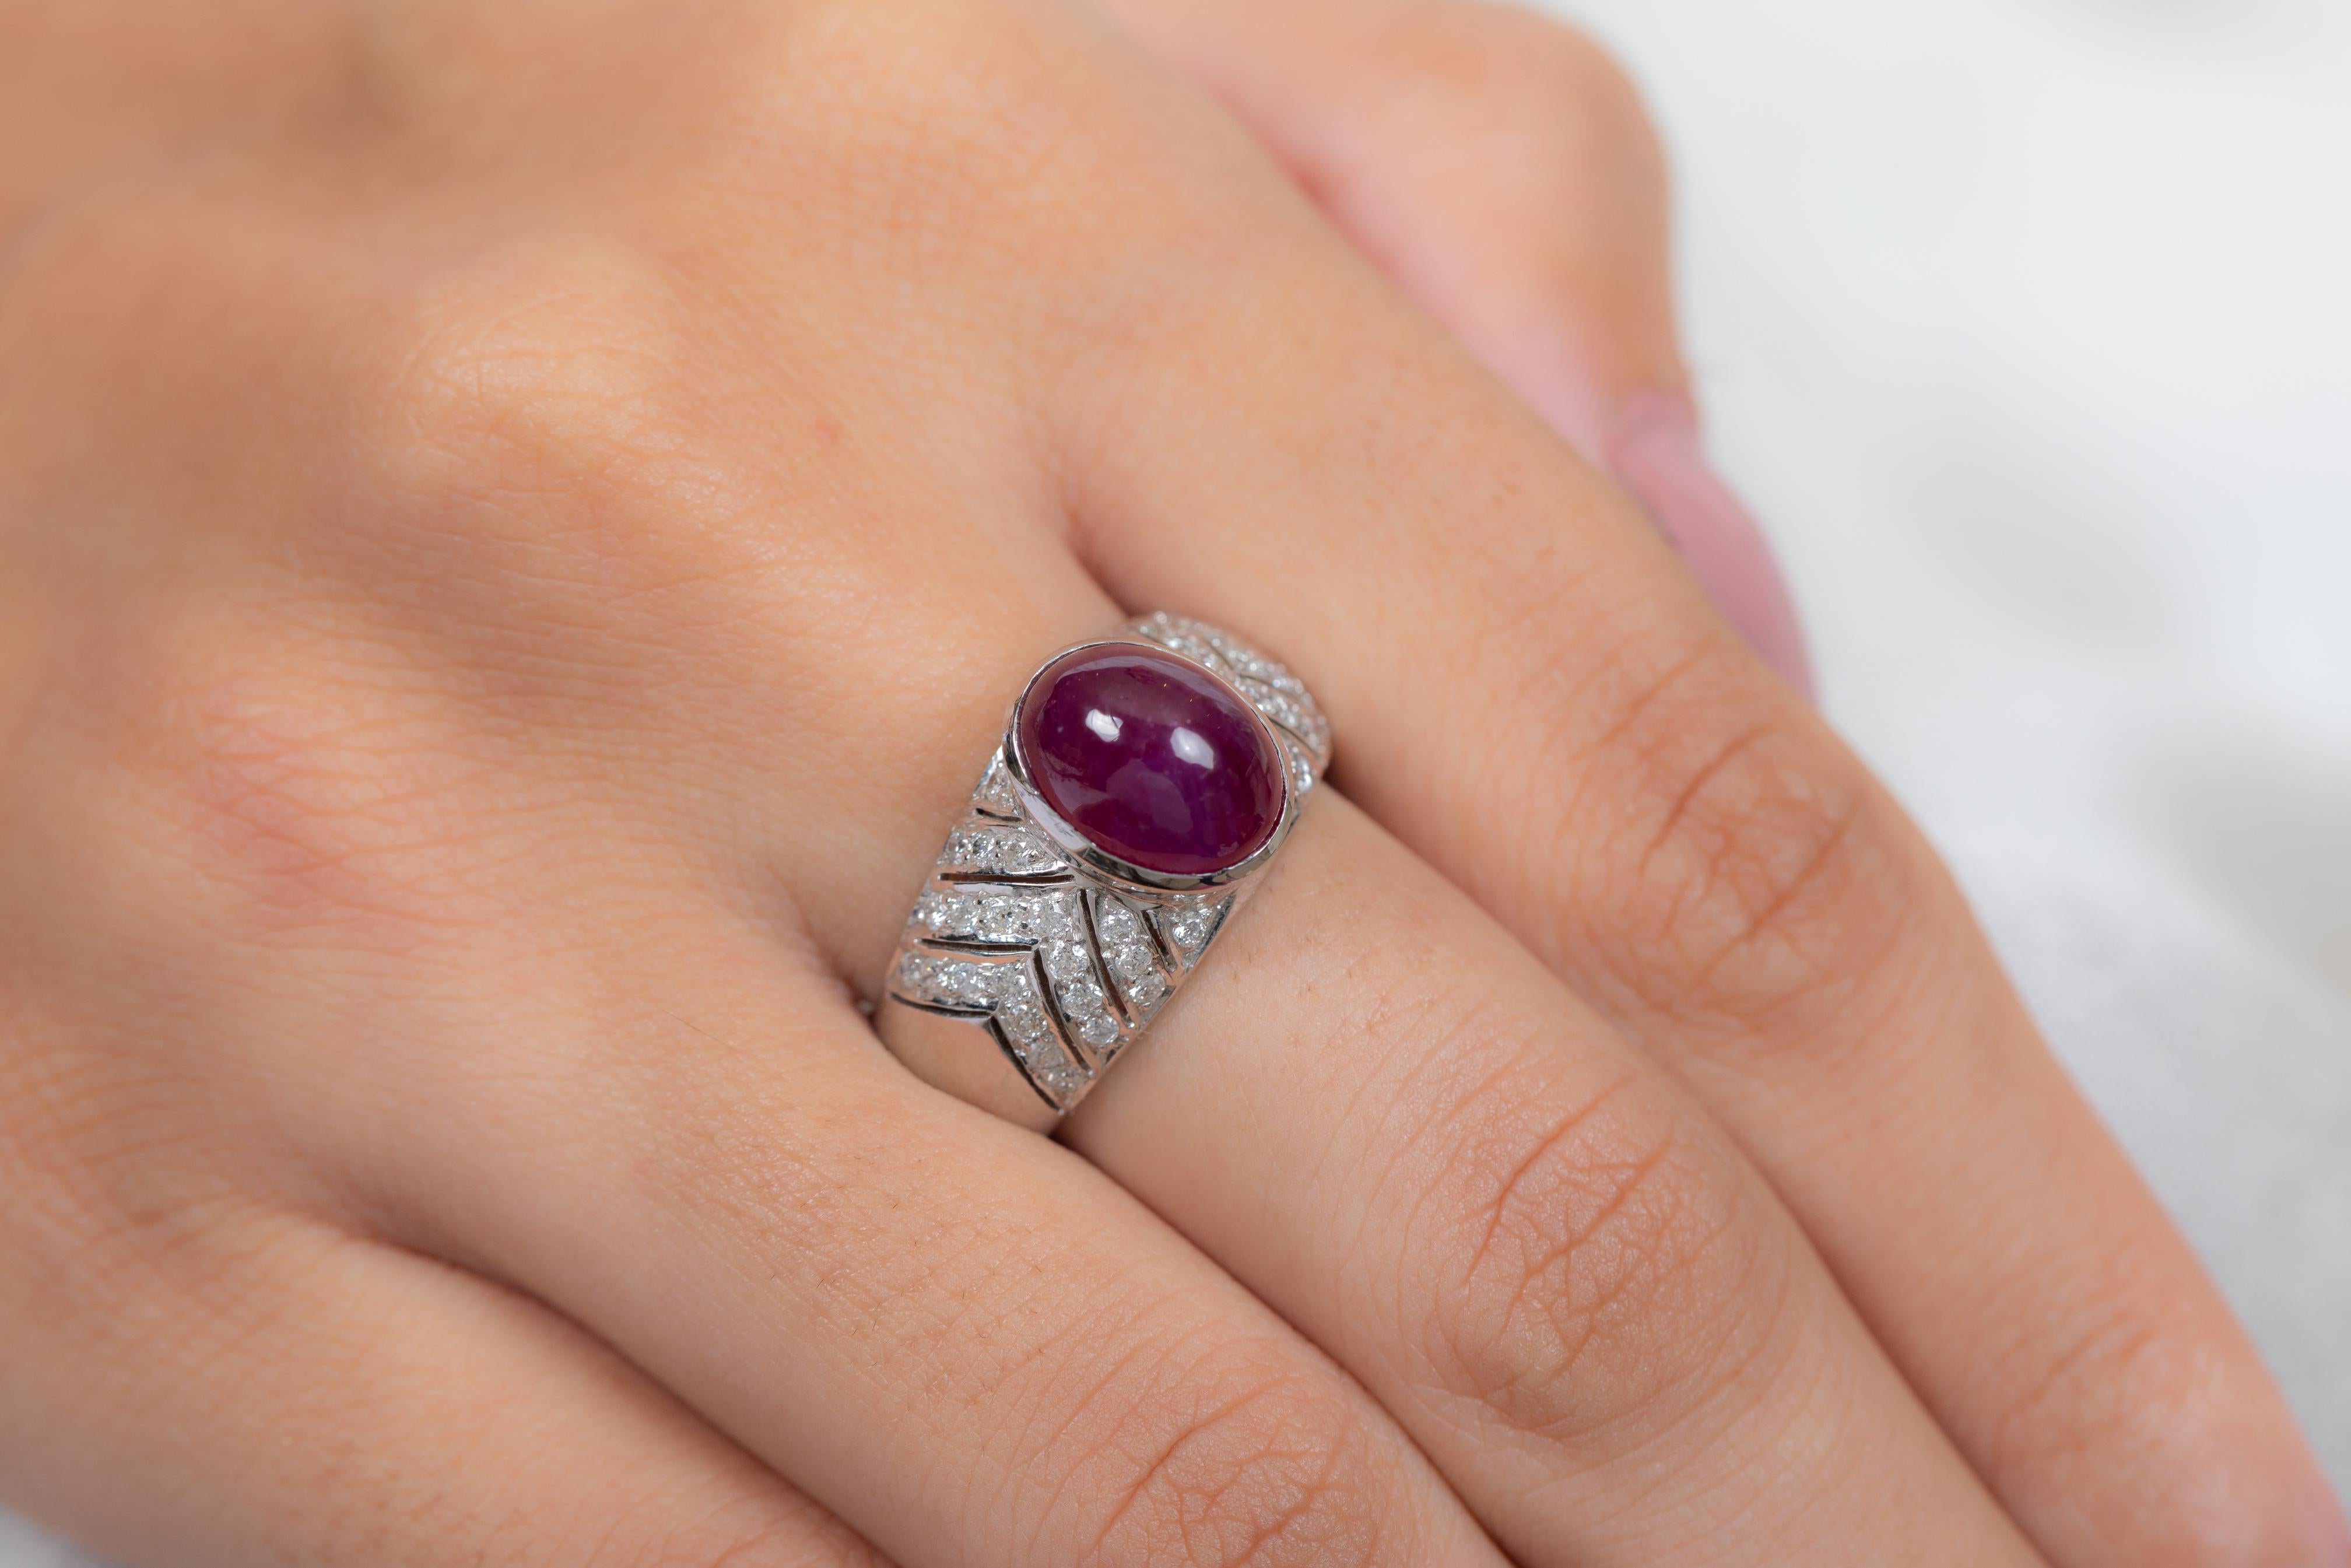 For Sale:  4.56 Carat Cabochon Ruby Cocktail Ring with Diamonds in 14K Solid White Gold 8